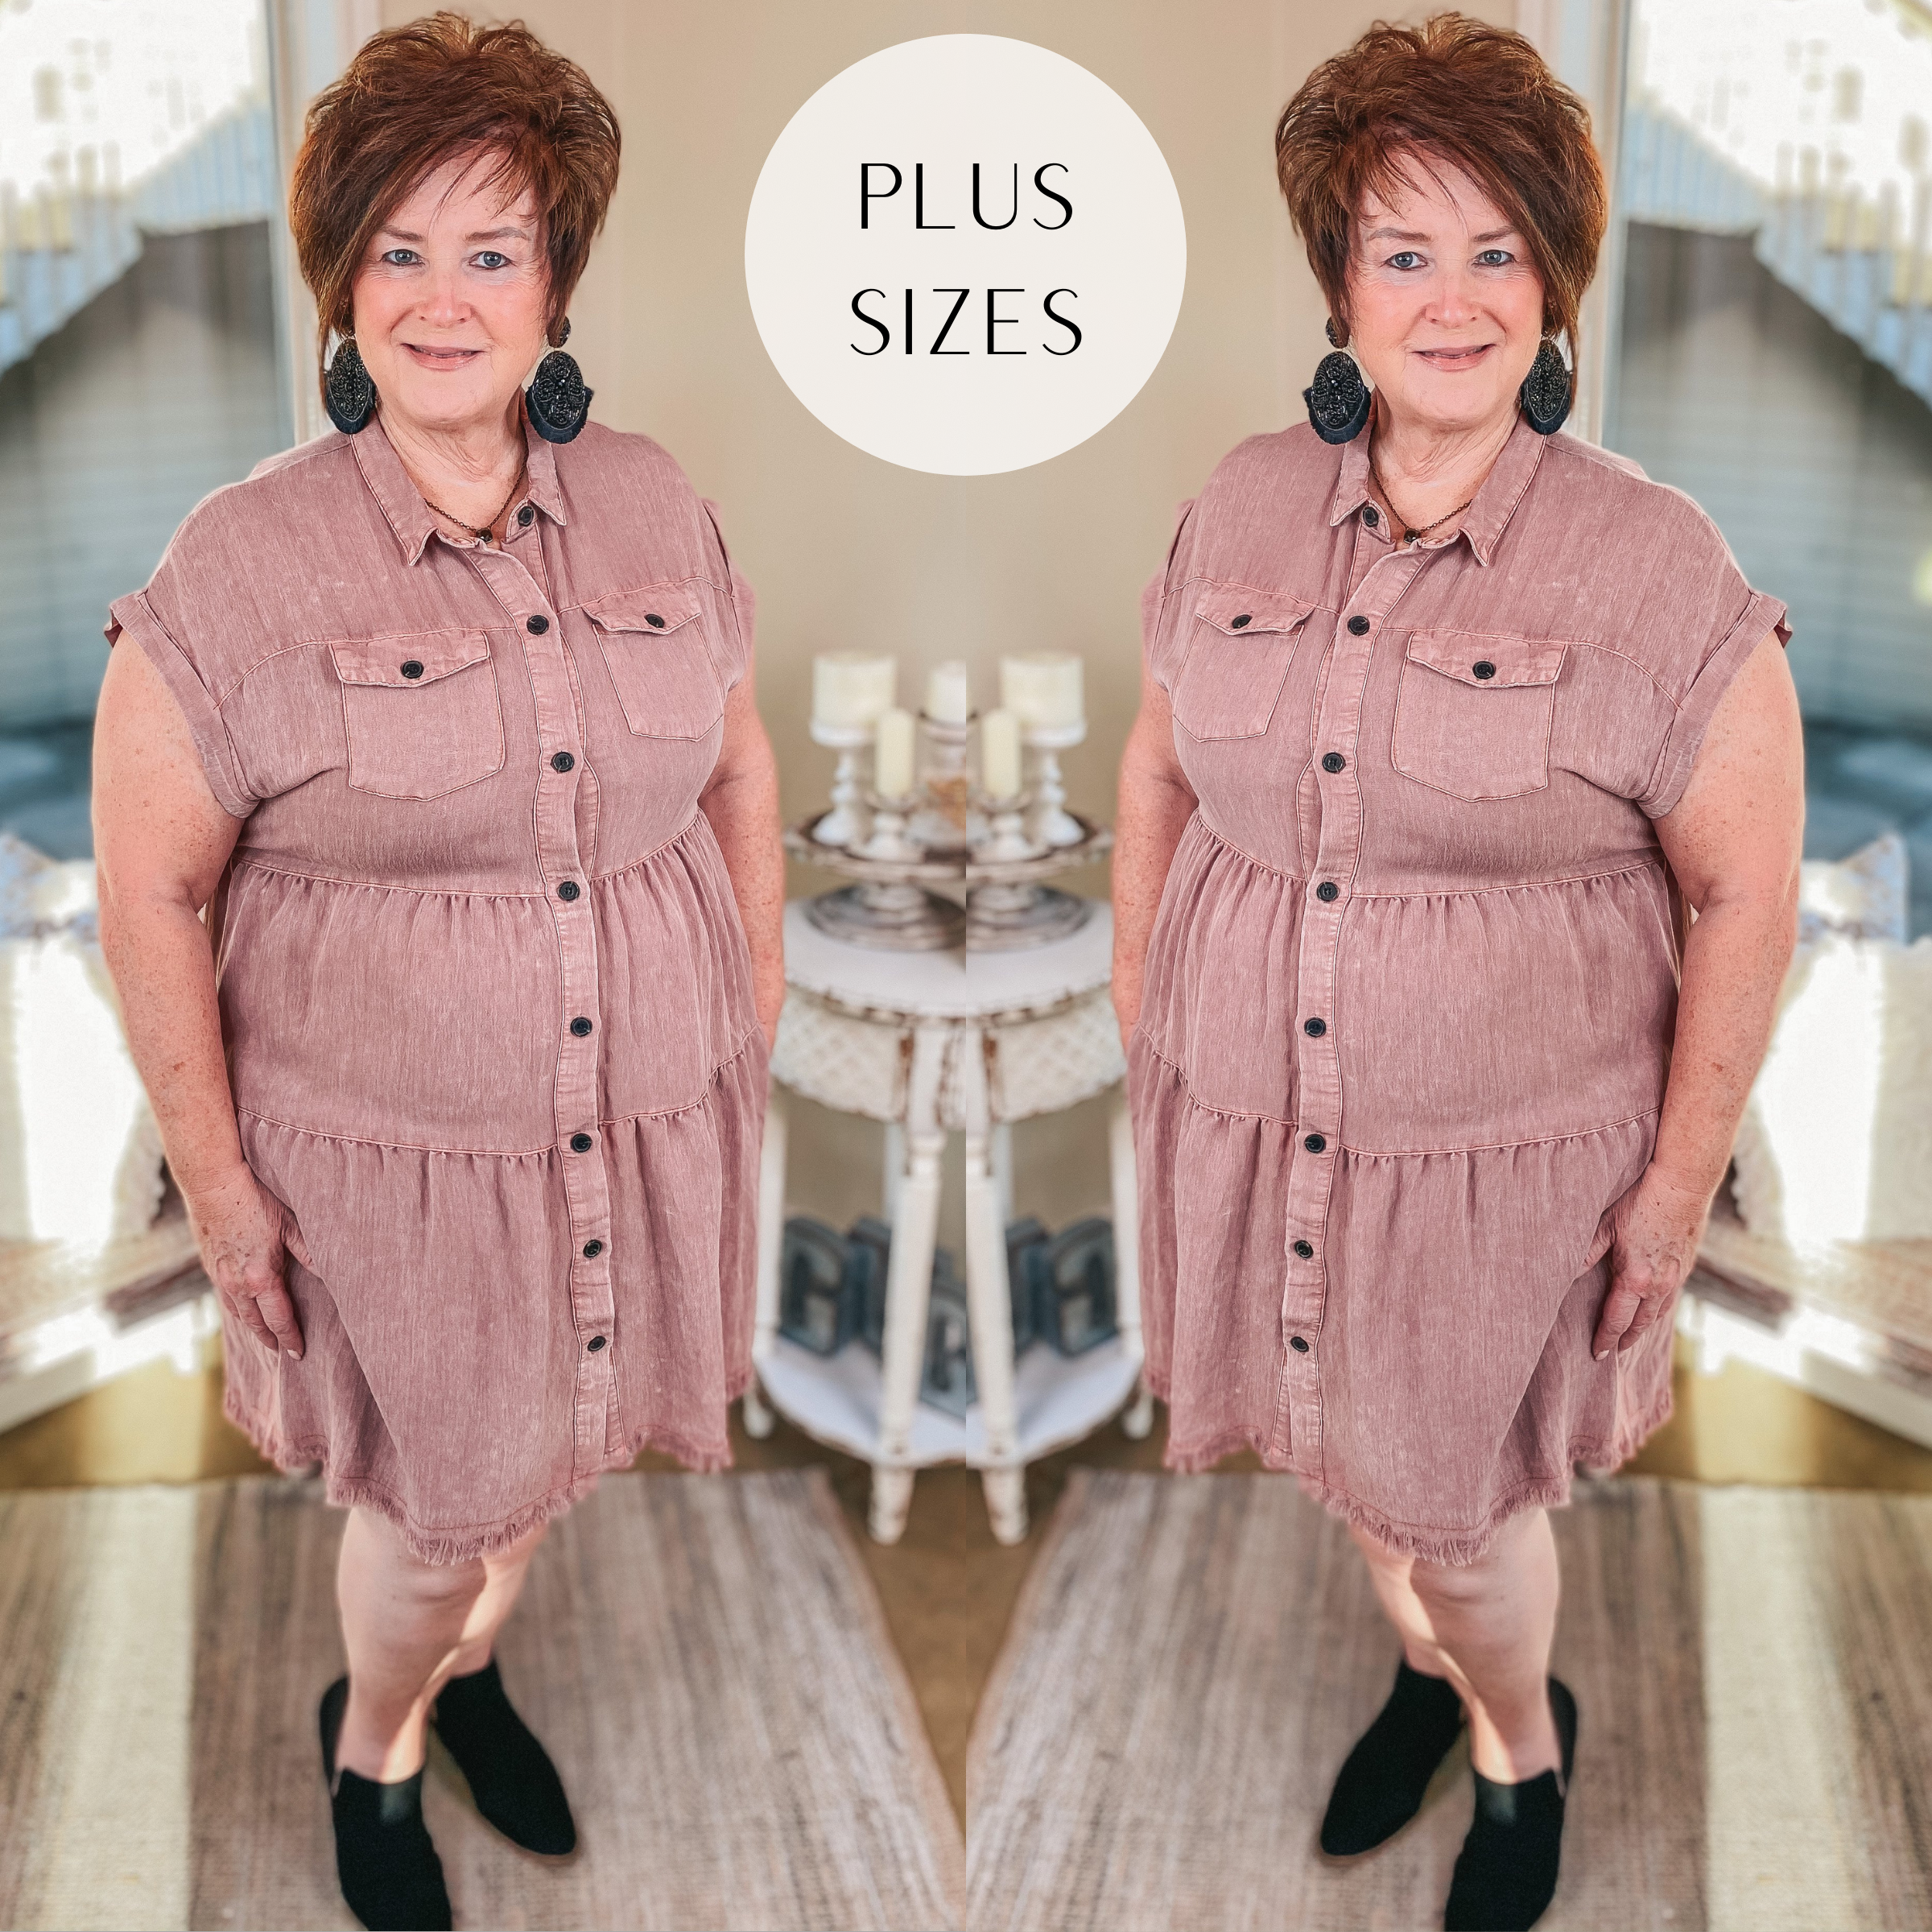 Plus Sizes | Oh Darling Ruffle Tiered Button Up Dress in Dark Mauve Pink - Giddy Up Glamour Boutique